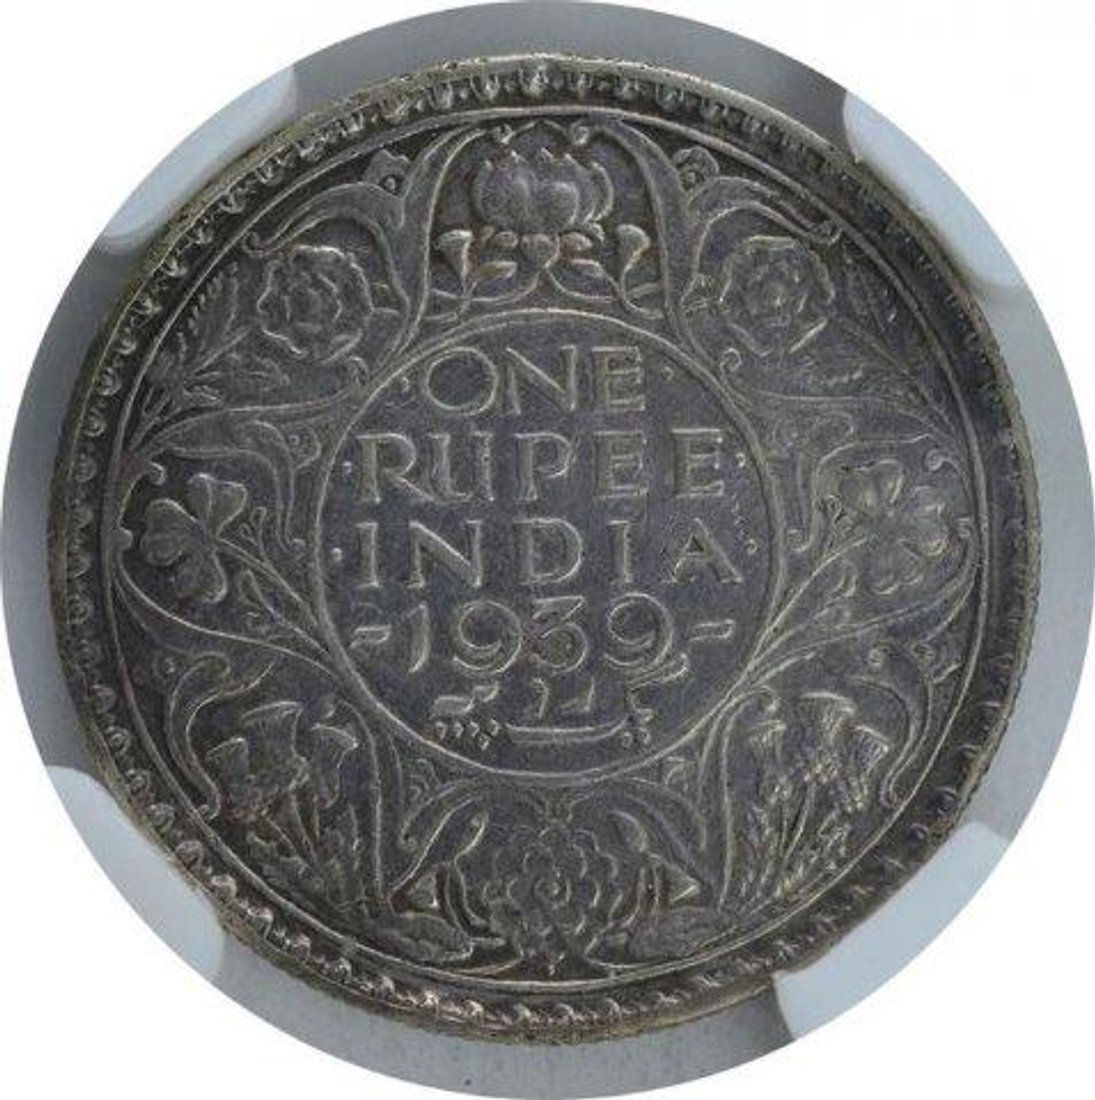 Silver One Rupee Coin of King George VI of Bombay Mint of 1939.